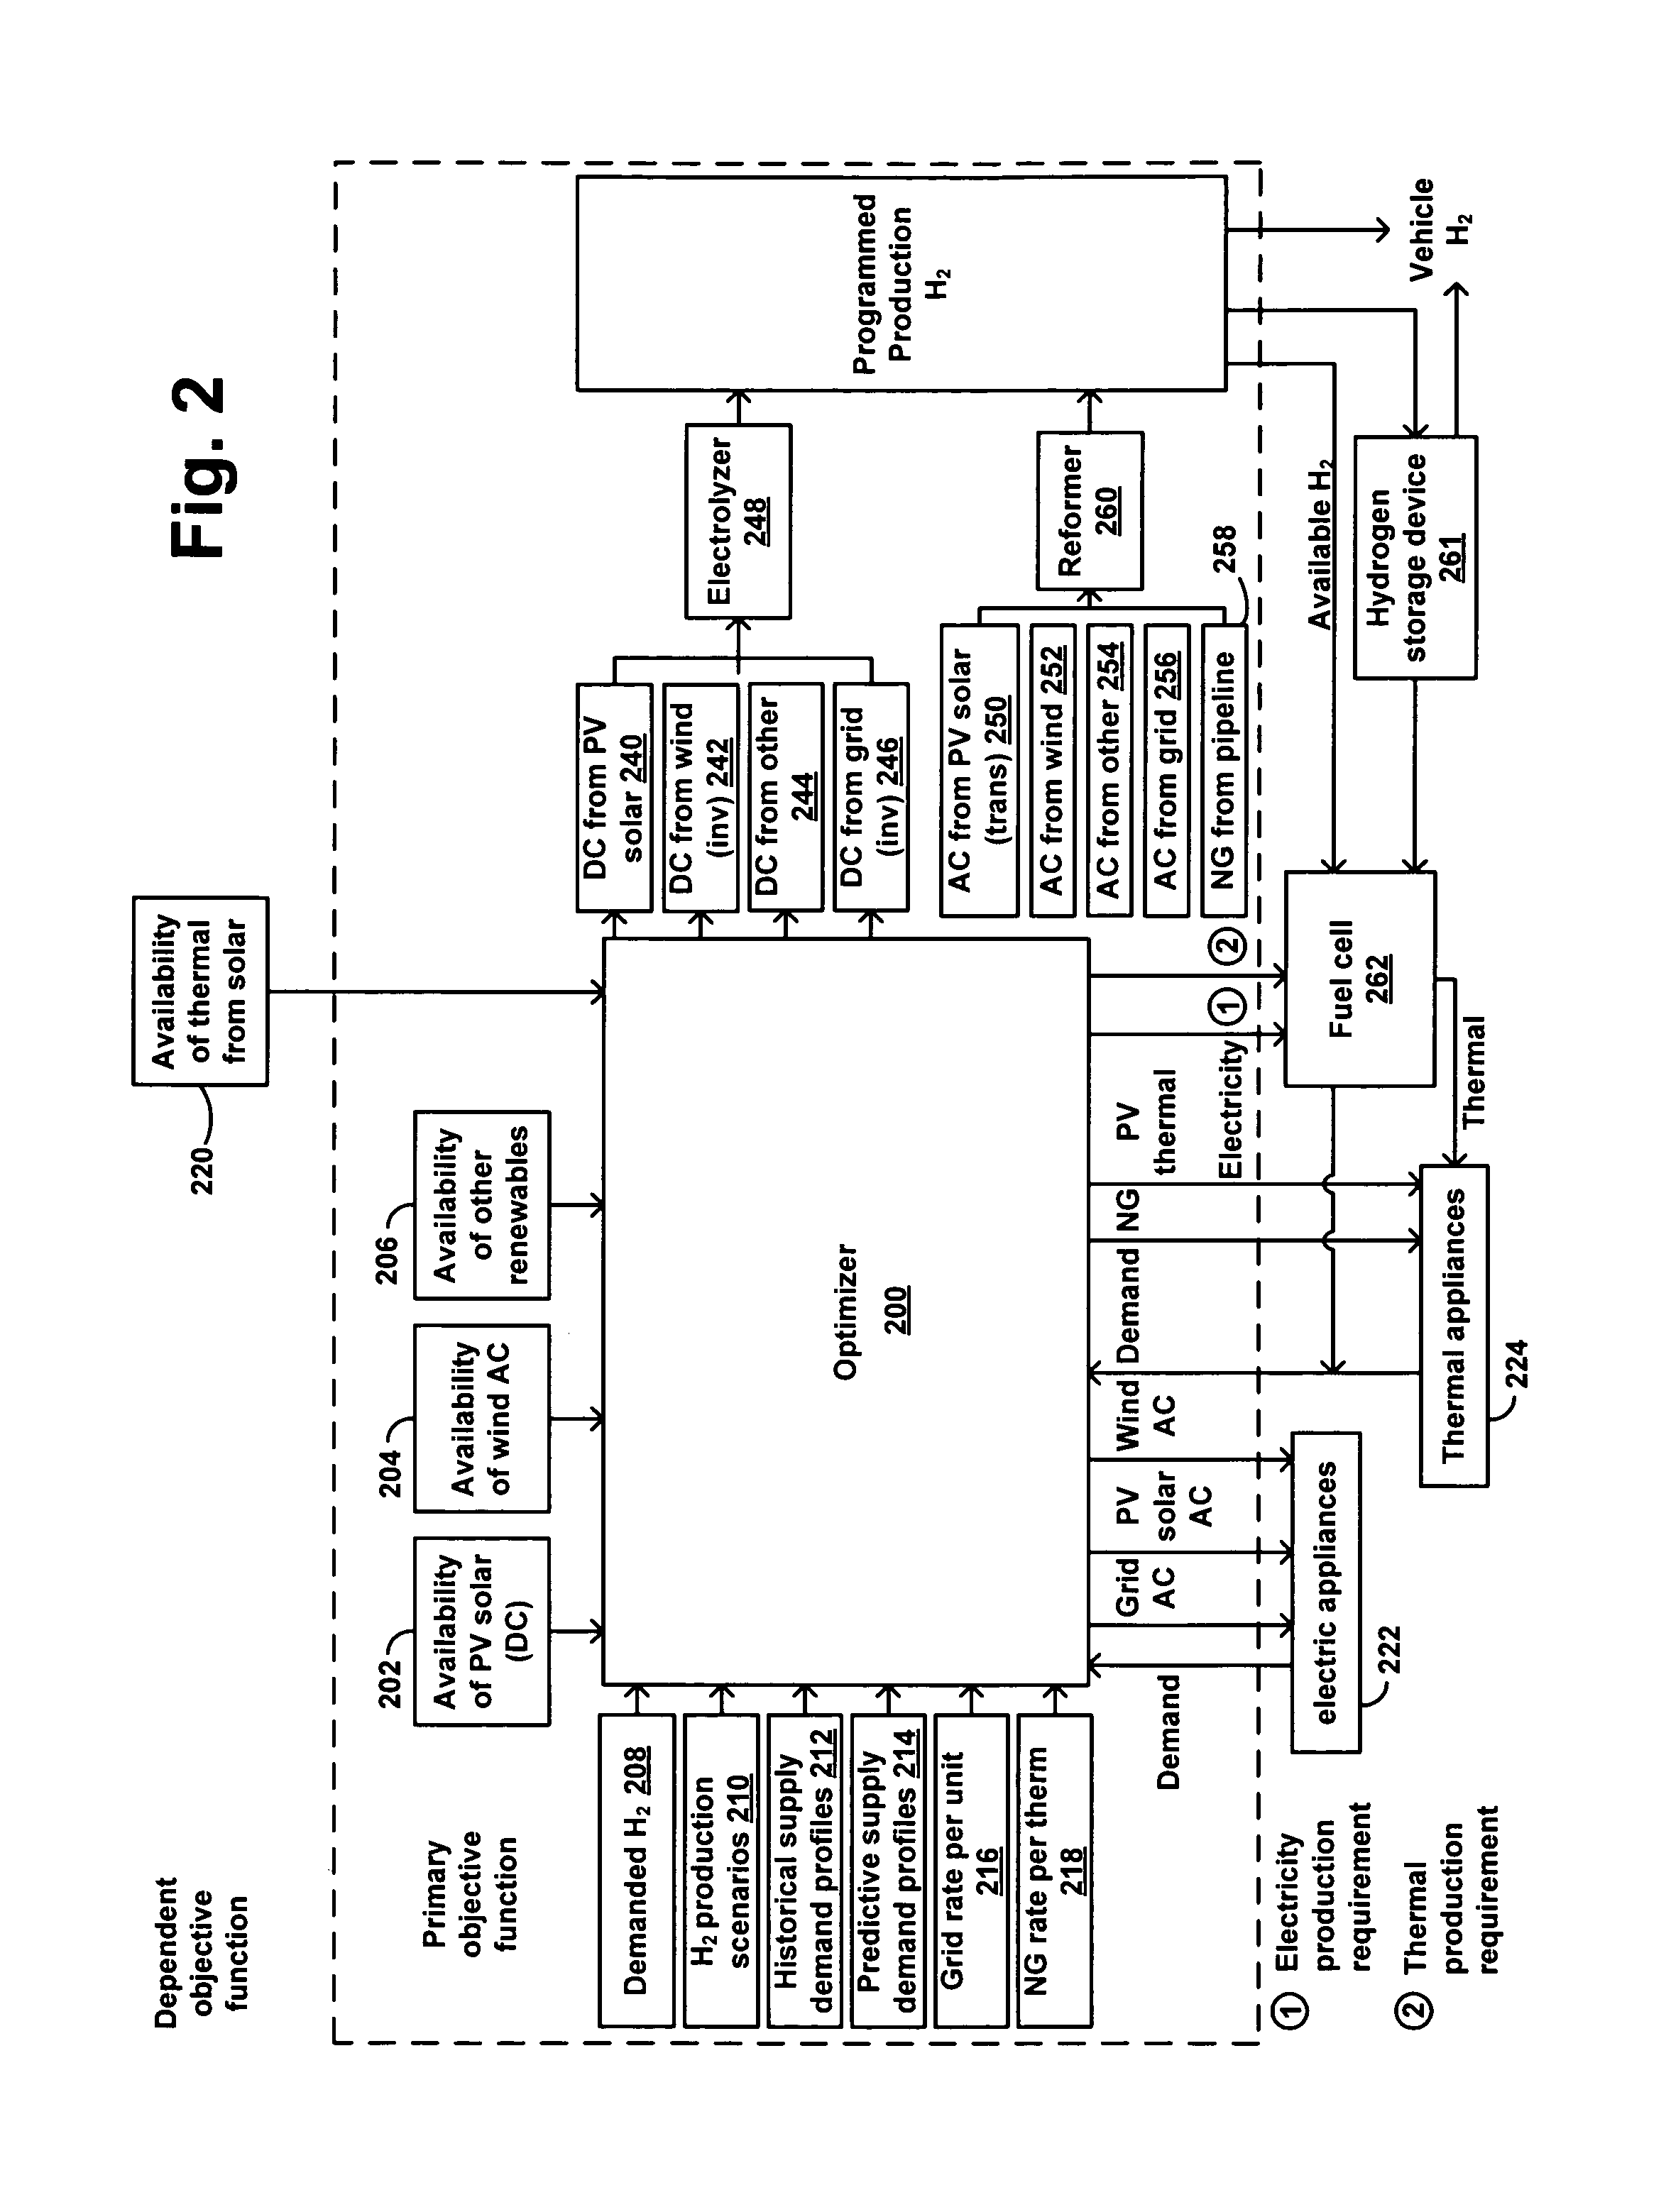 Method and apparatus for simultaneous optimization of distributed generation and hydrogen production